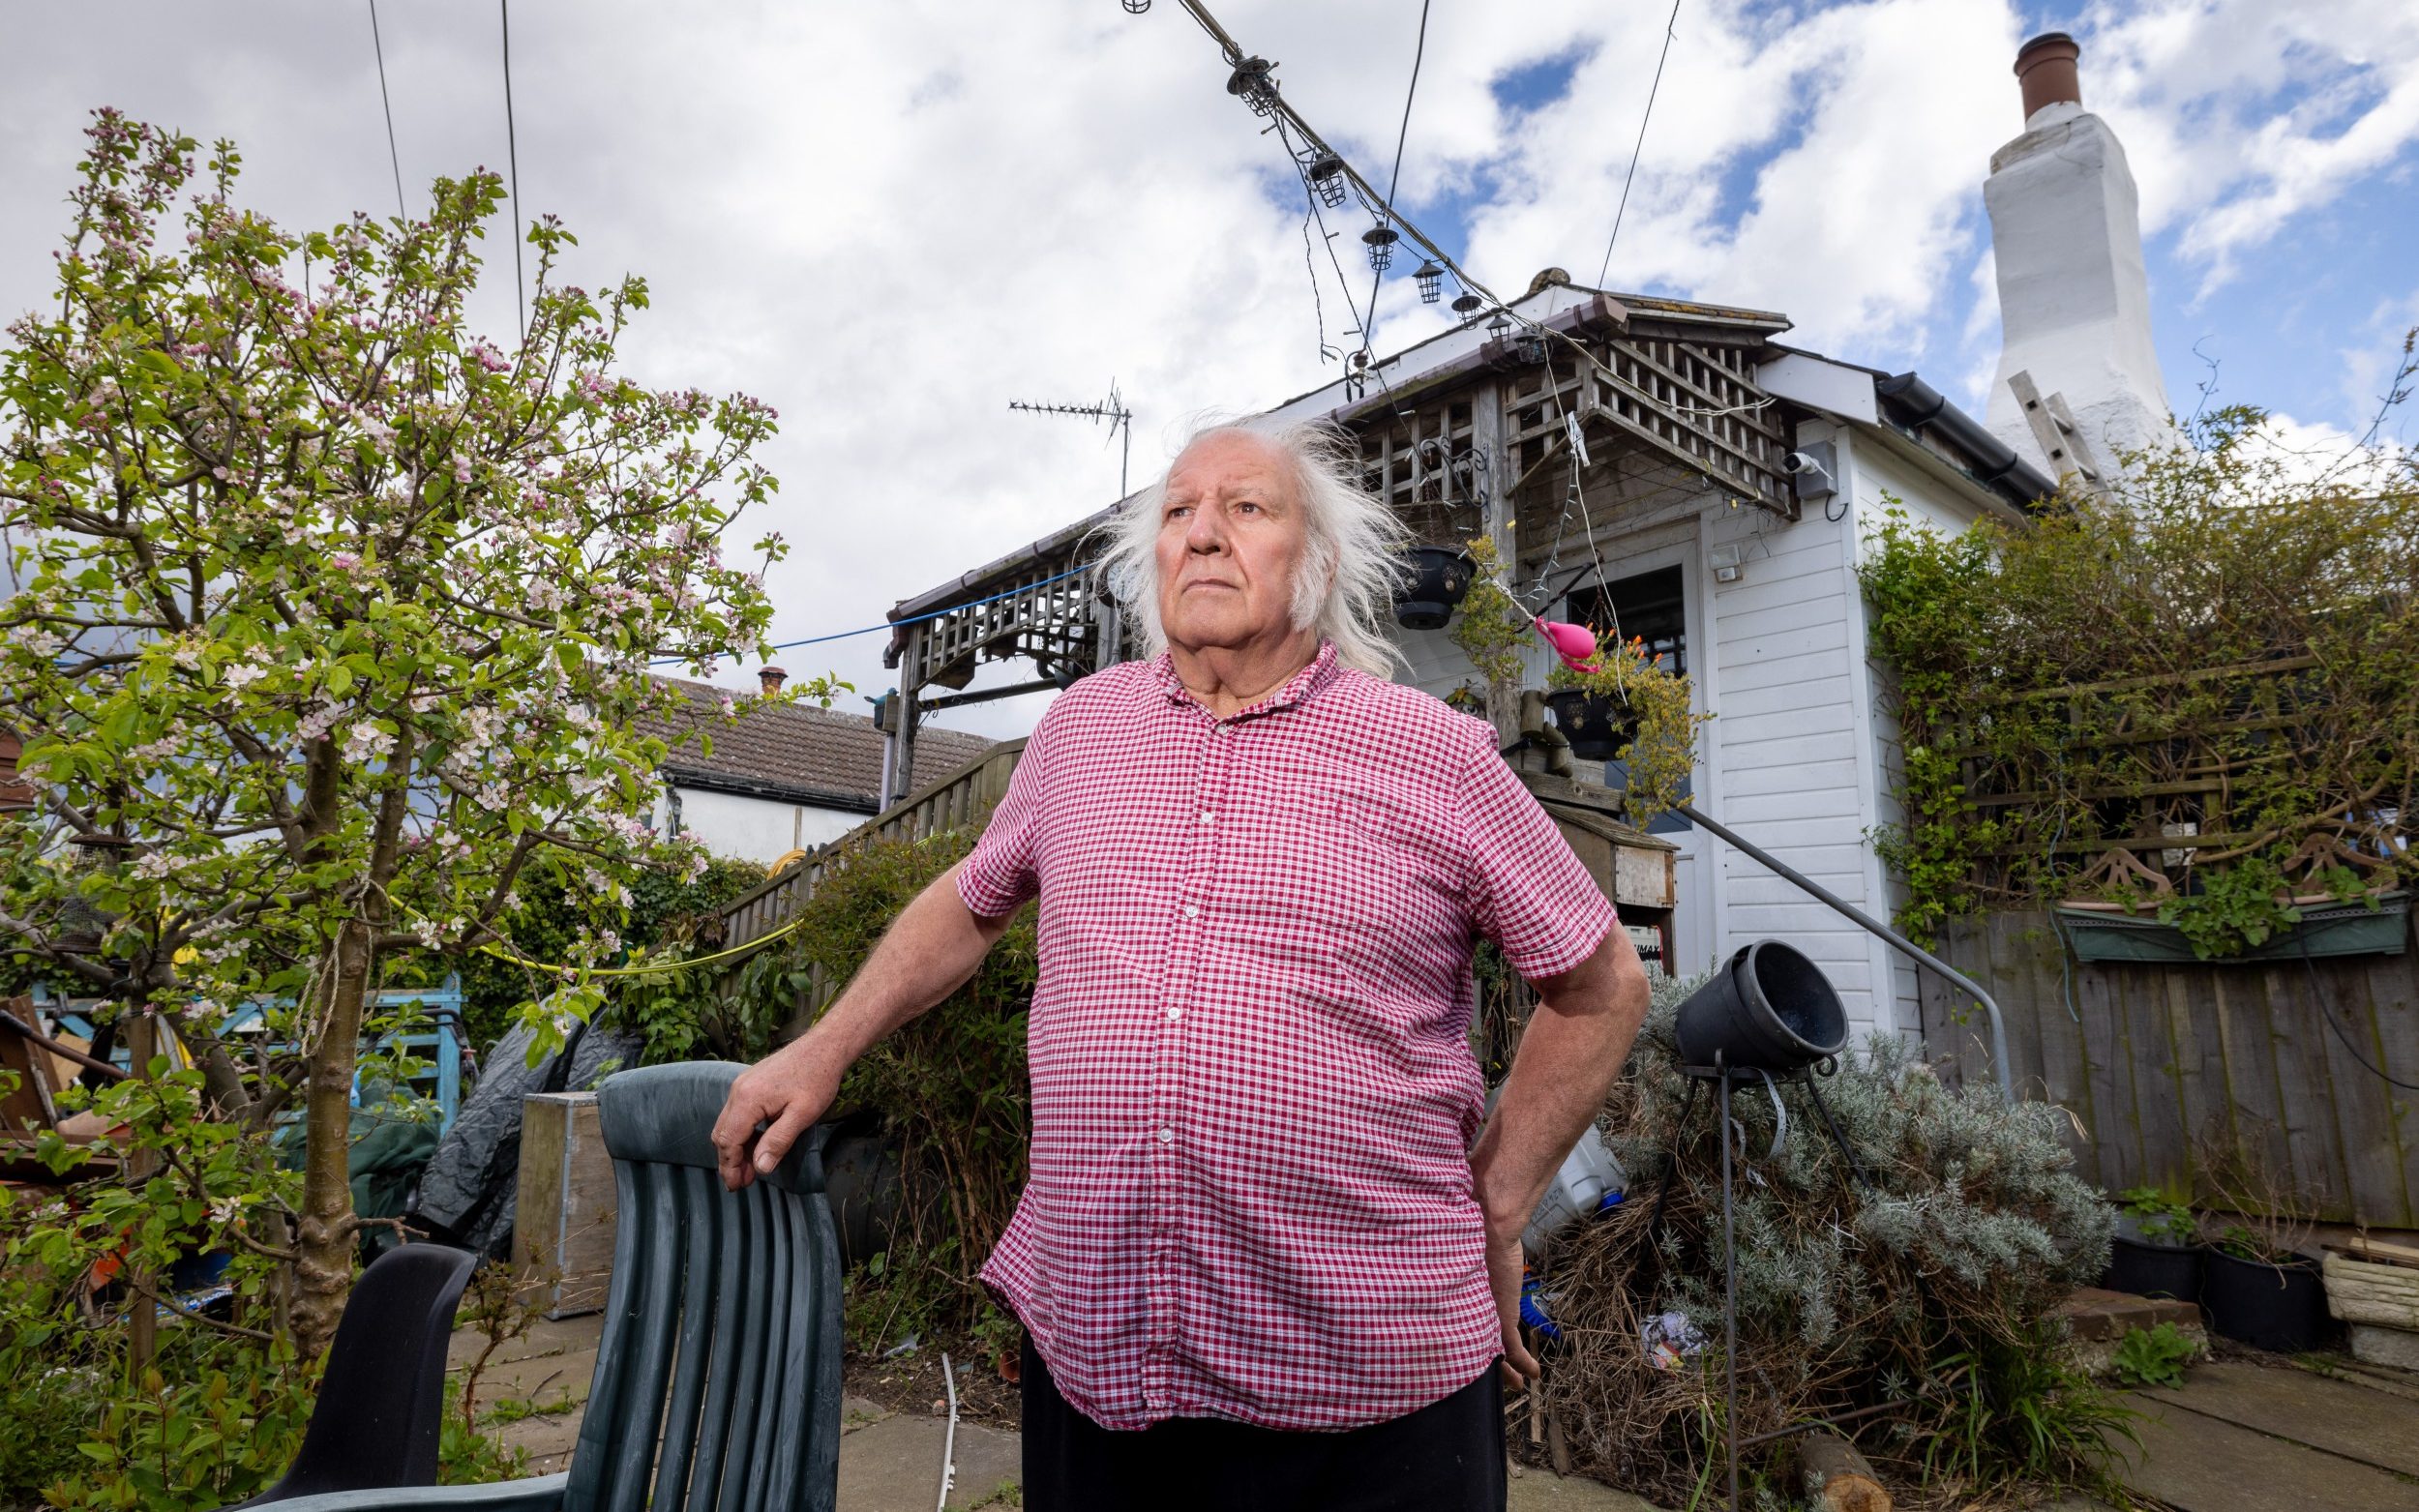 ‘erosion has made my house worthless, but i’m happy to die here’